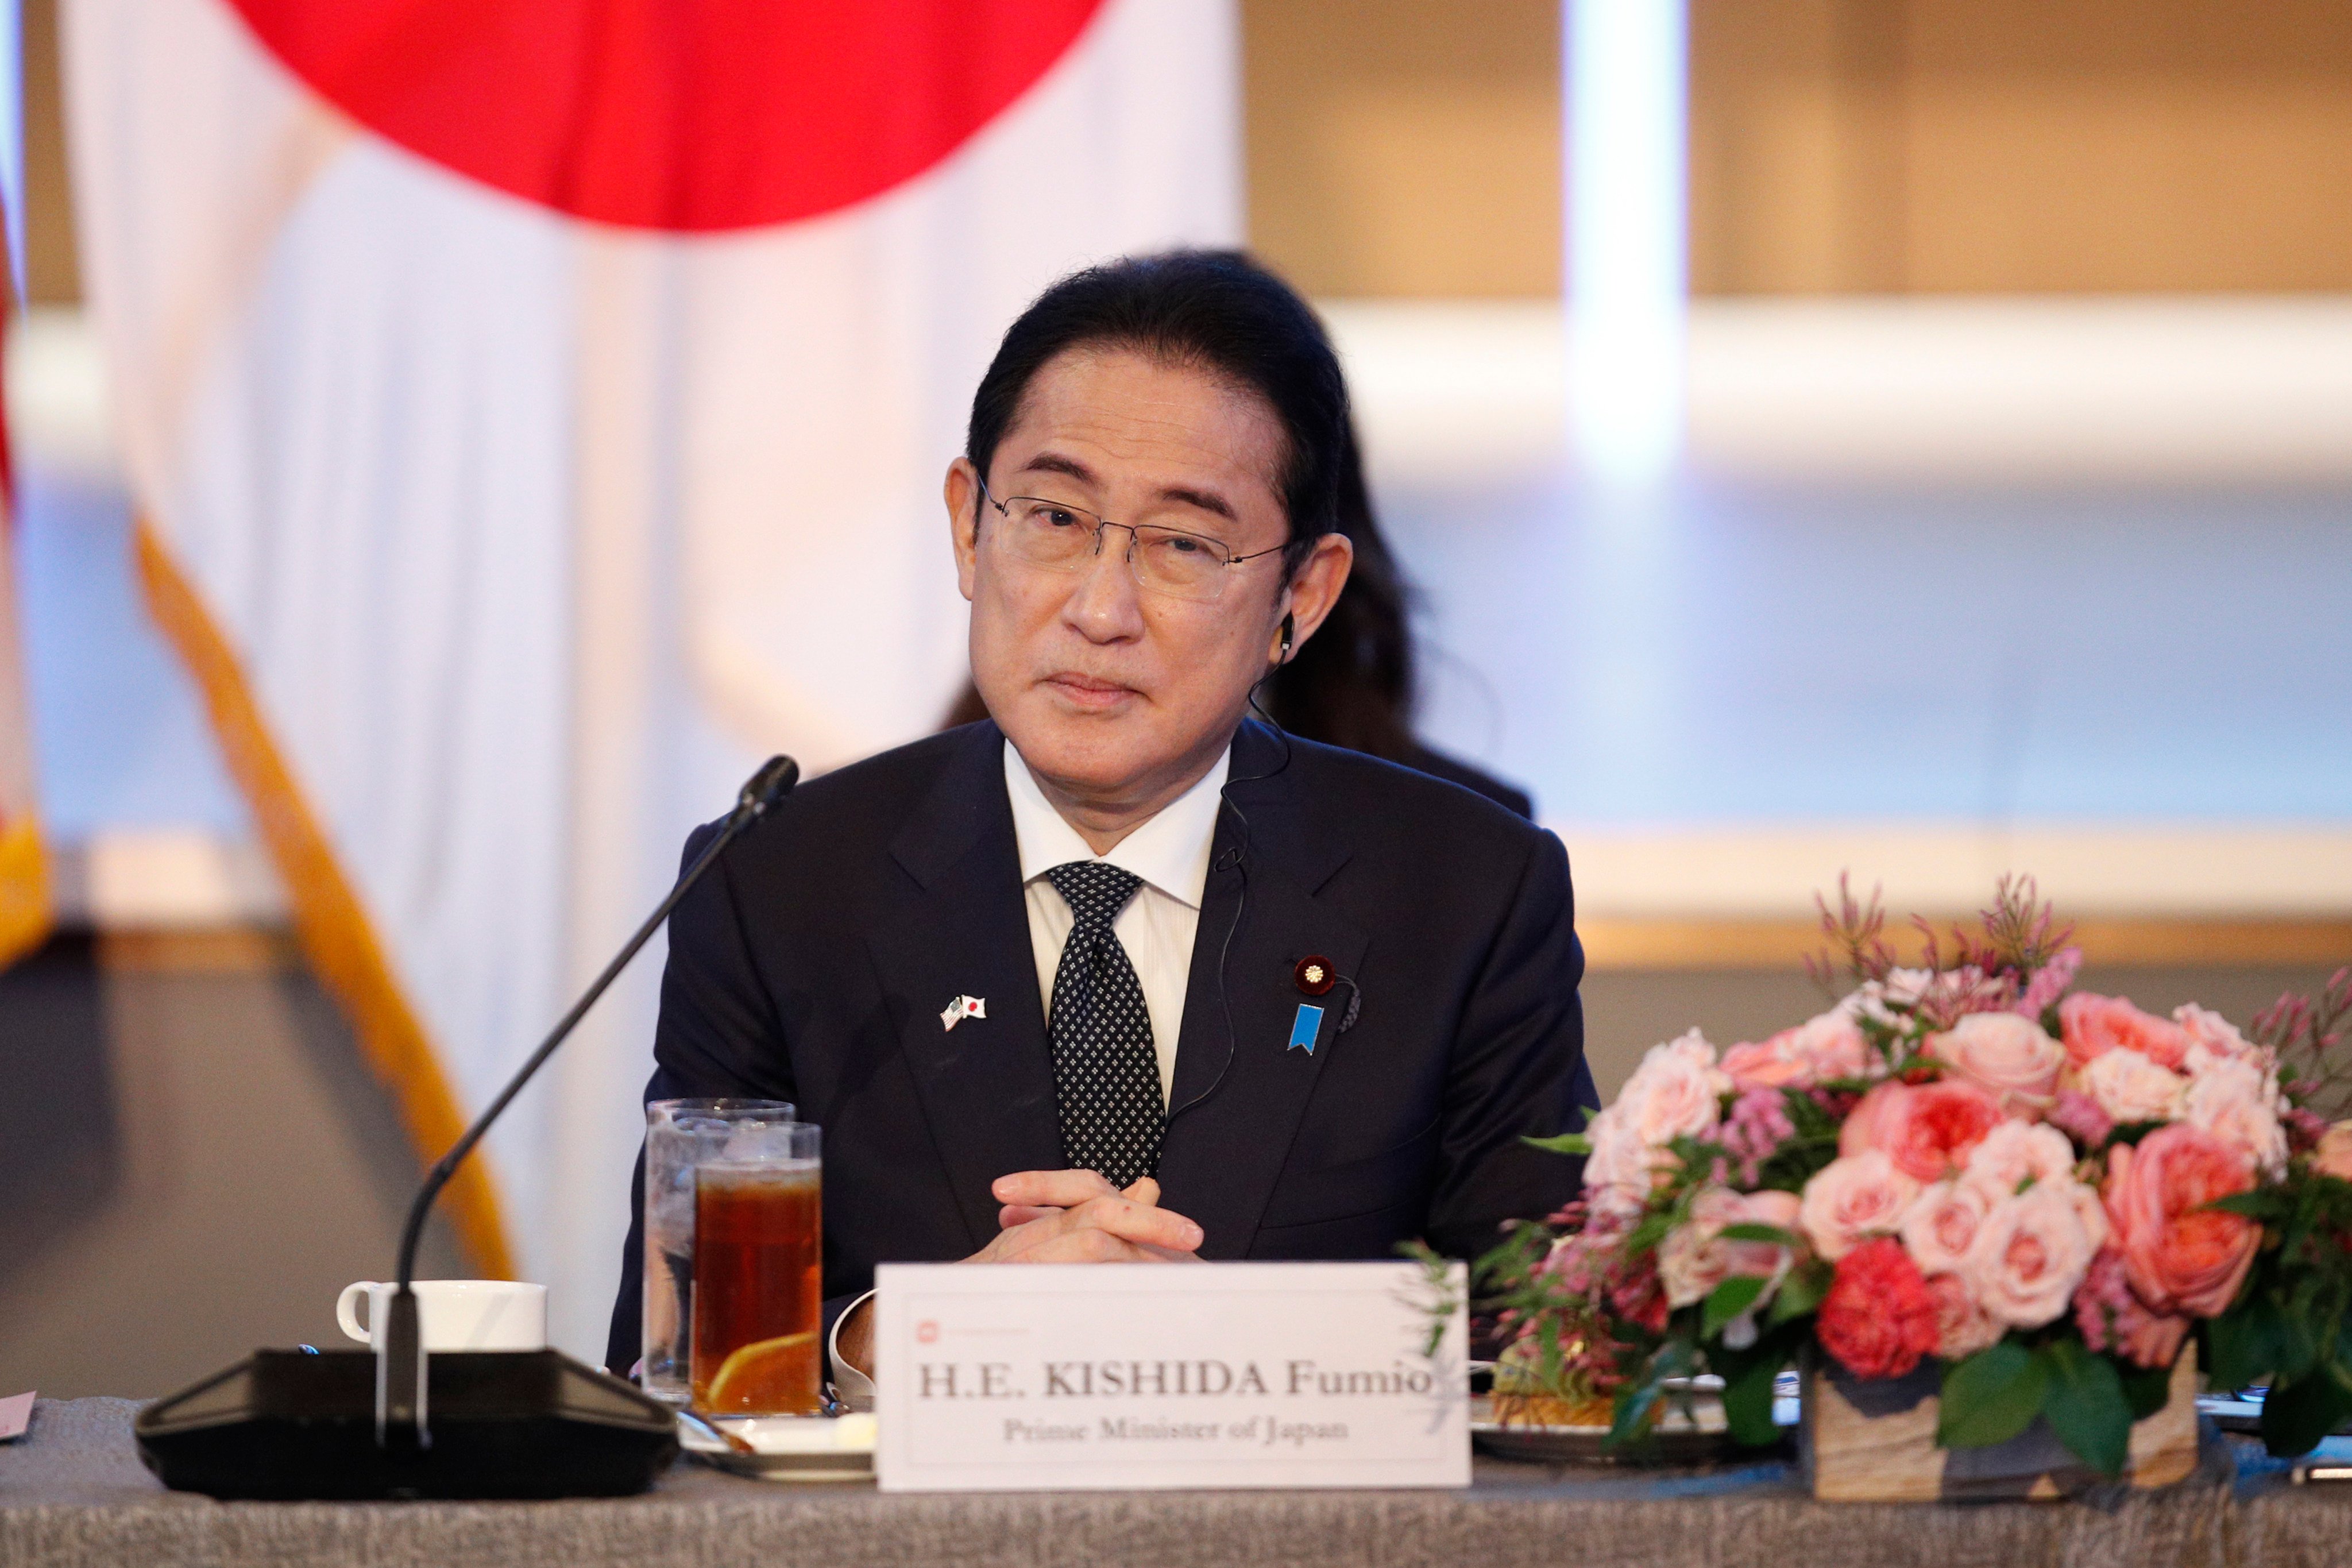 Japanese Prime Minister Fumio Kishida takes part in a round-table discussion with business leaders on Tuesday in Washington. Photo: AP